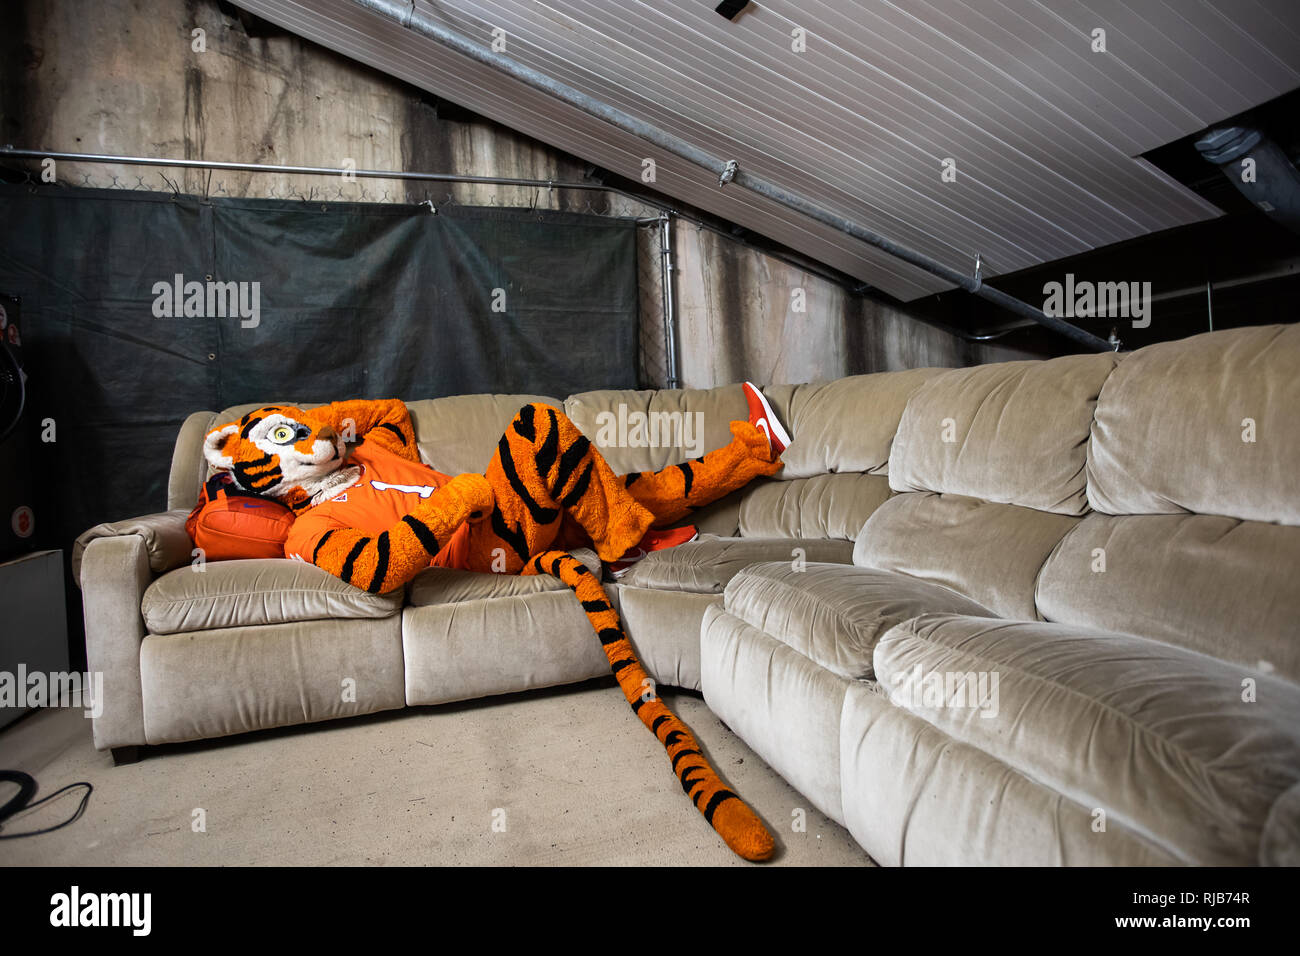 clemson-university-mascot-the-tiger-and-cubby-during-football-parade-and-walking-around-campus-RJB74R.jpg